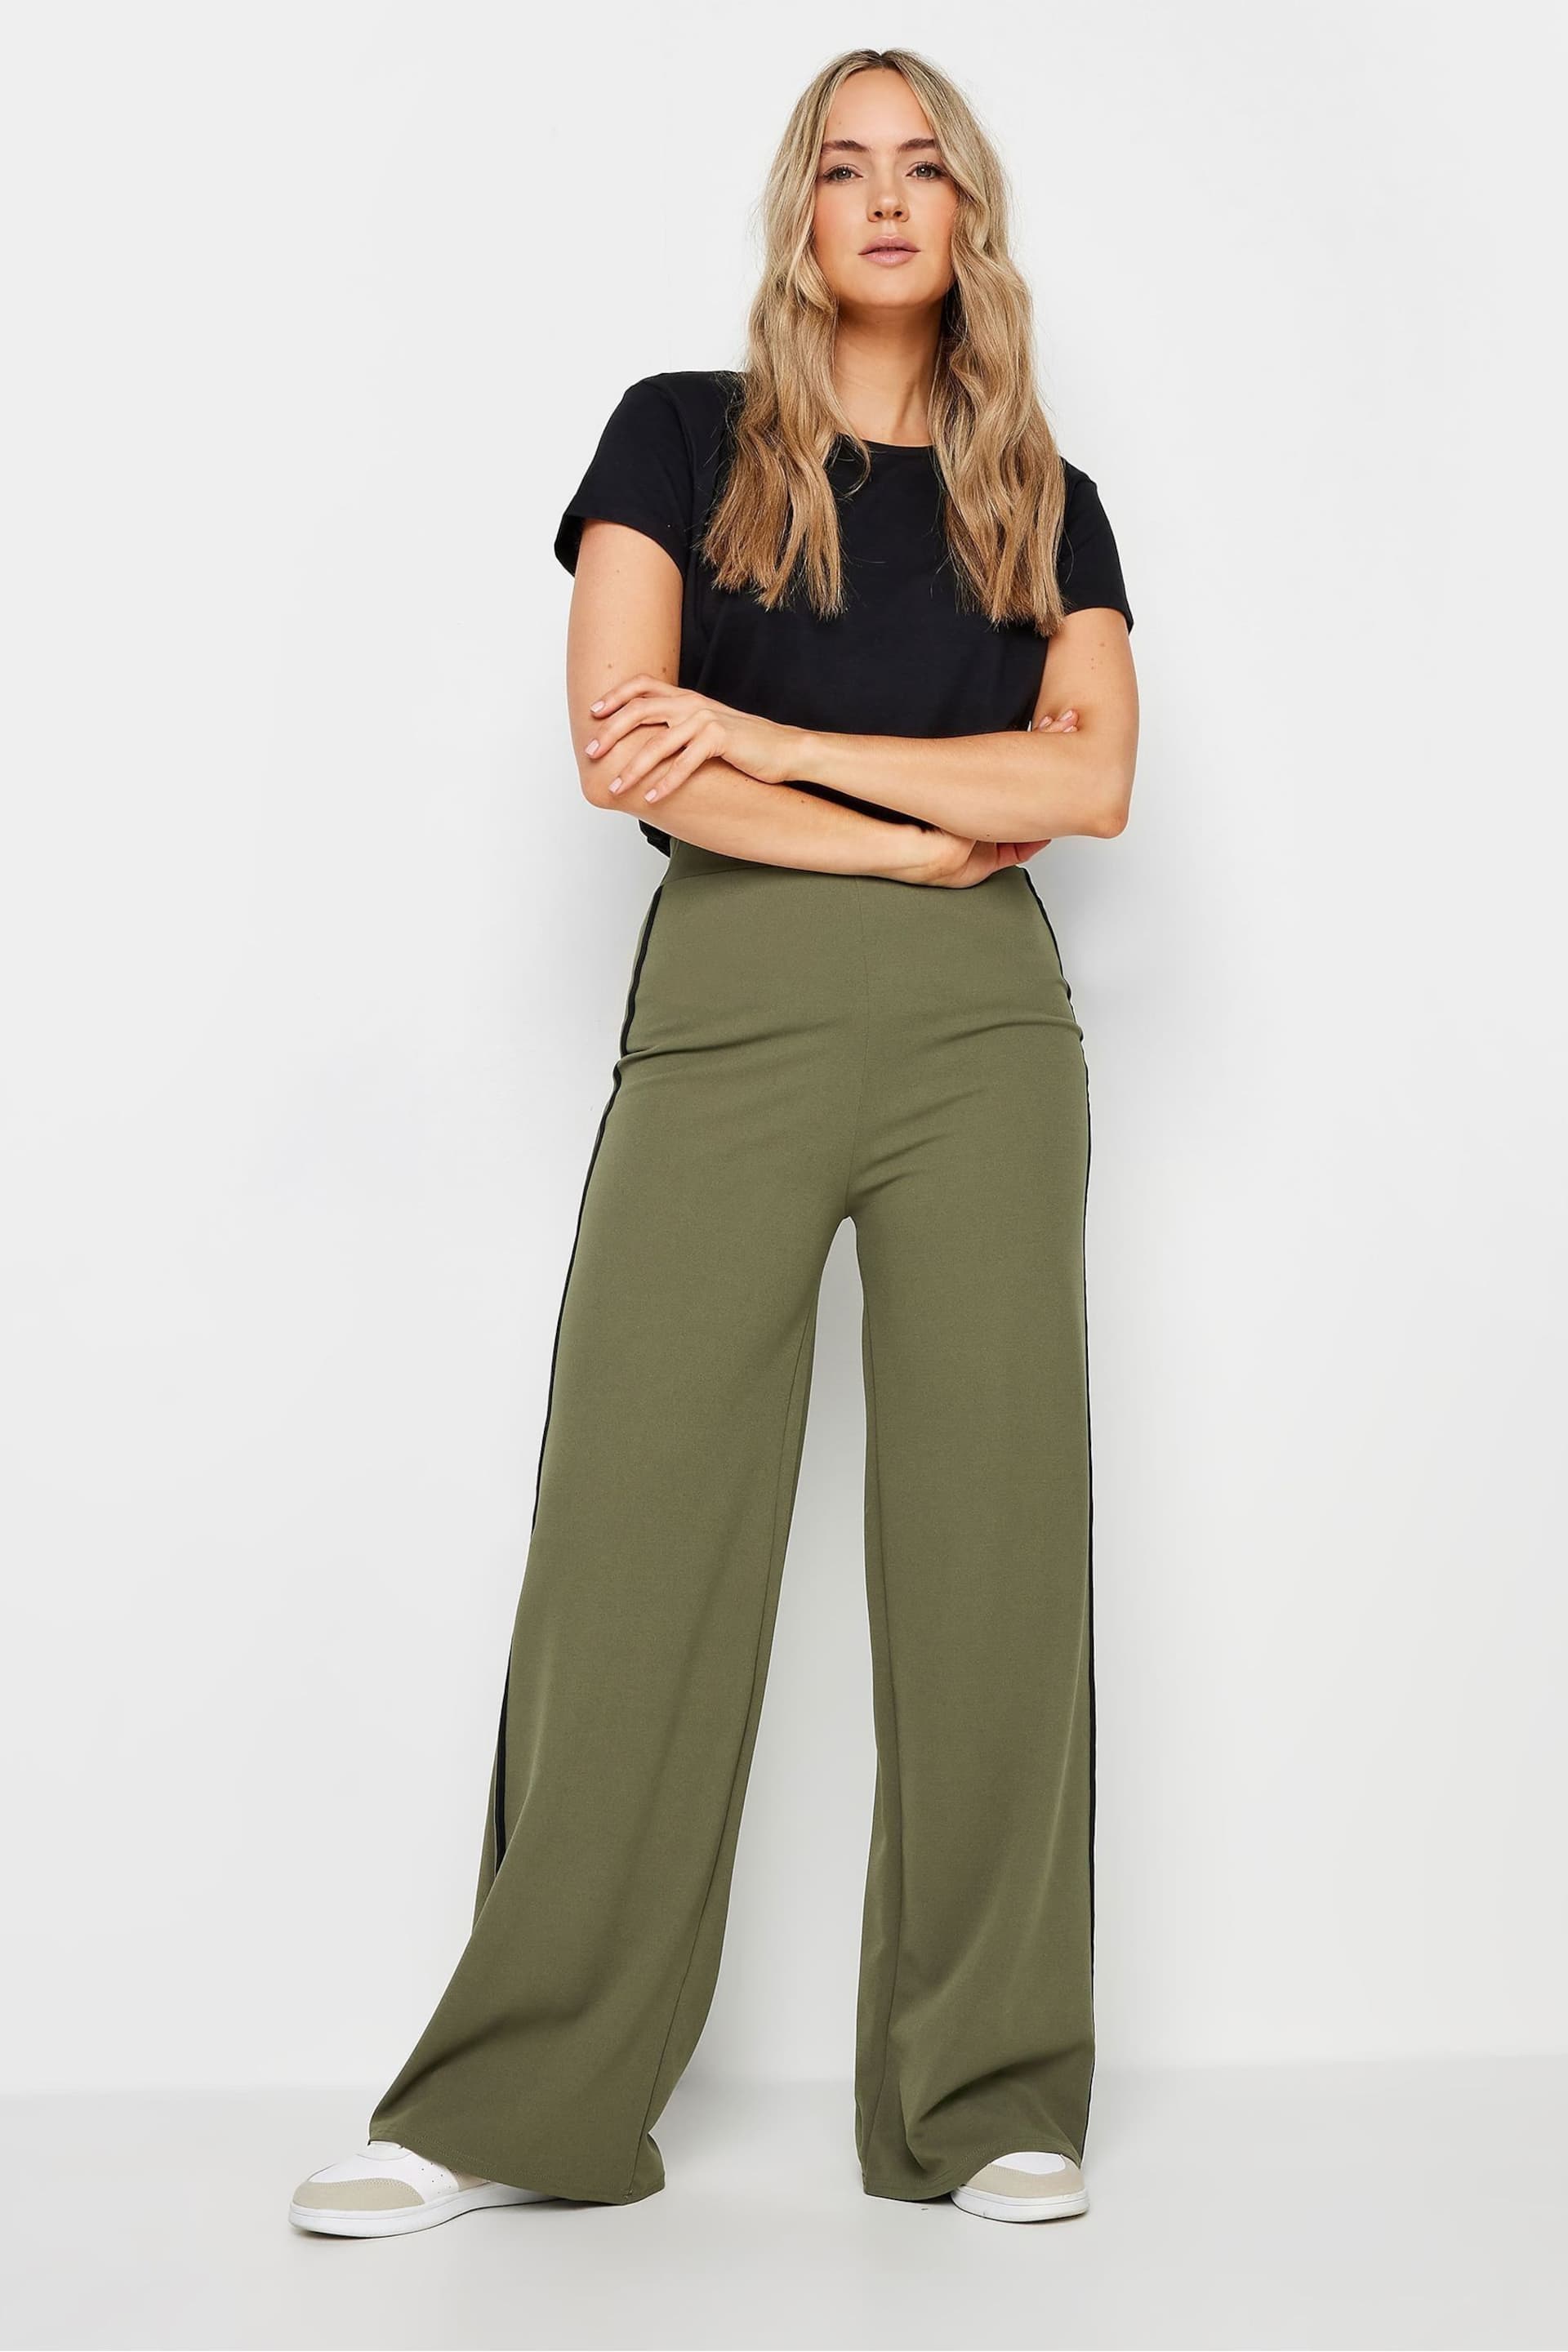 Long Tall Sally Green Side Stripe Wide Leg Trousers - Image 1 of 5